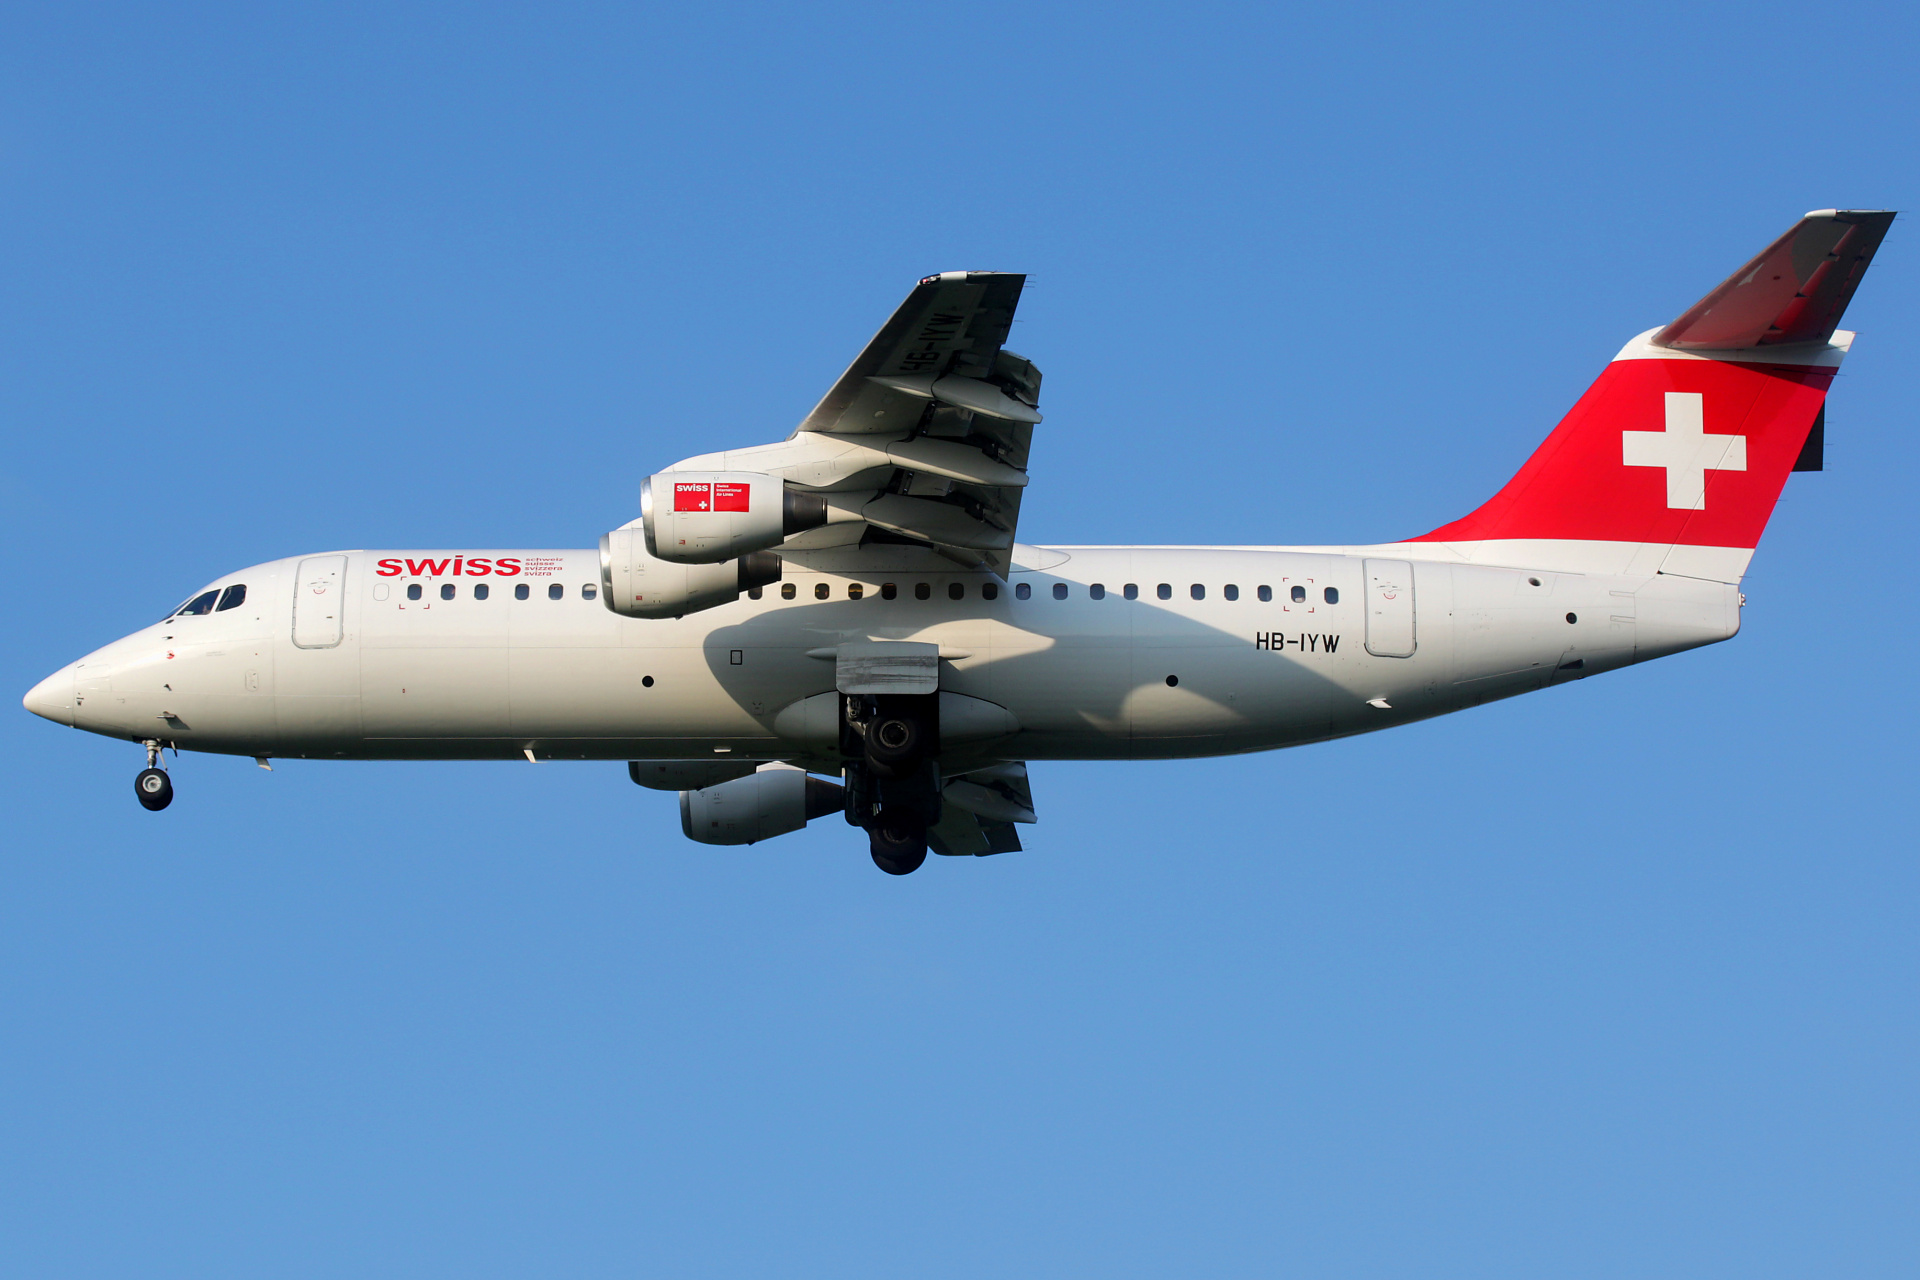 HB-IYW (Aircraft » EPWA Spotting » BAe 146 and revisions » Avro RJ100 » Swiss Global Air Lines)